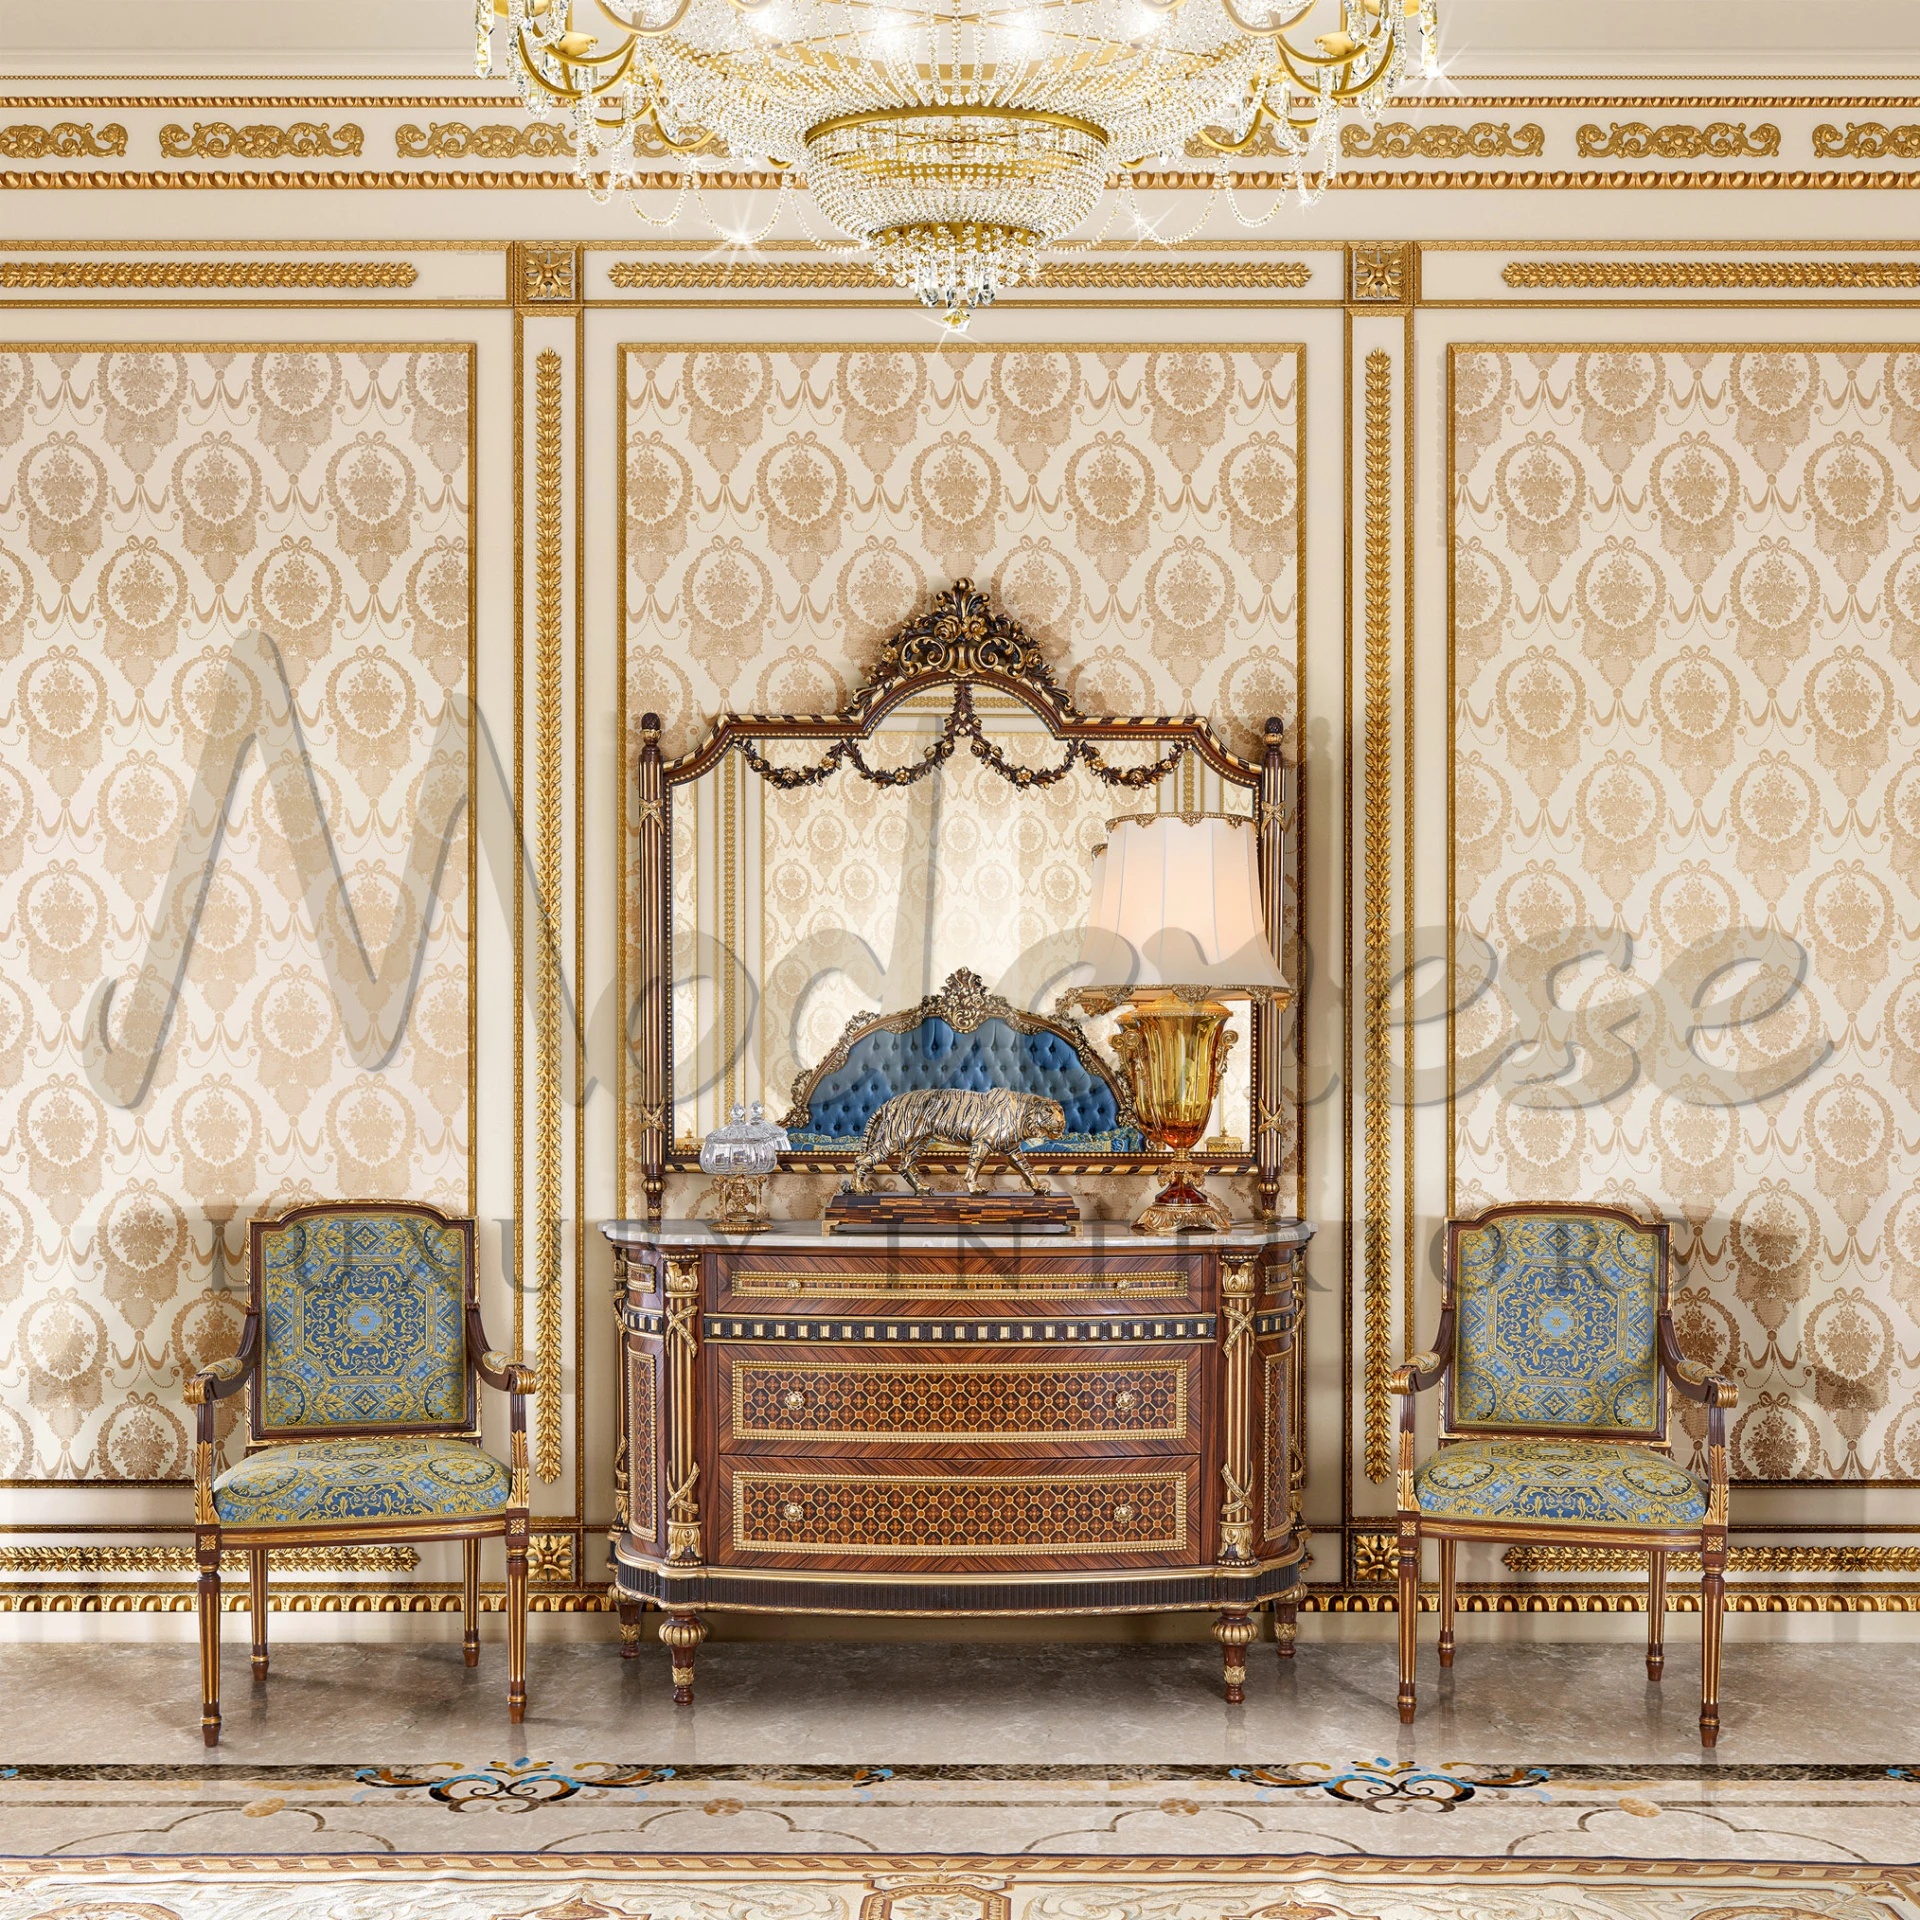 Italian designed handmade baroque chairs with armrest with a cabinet and golden accents.